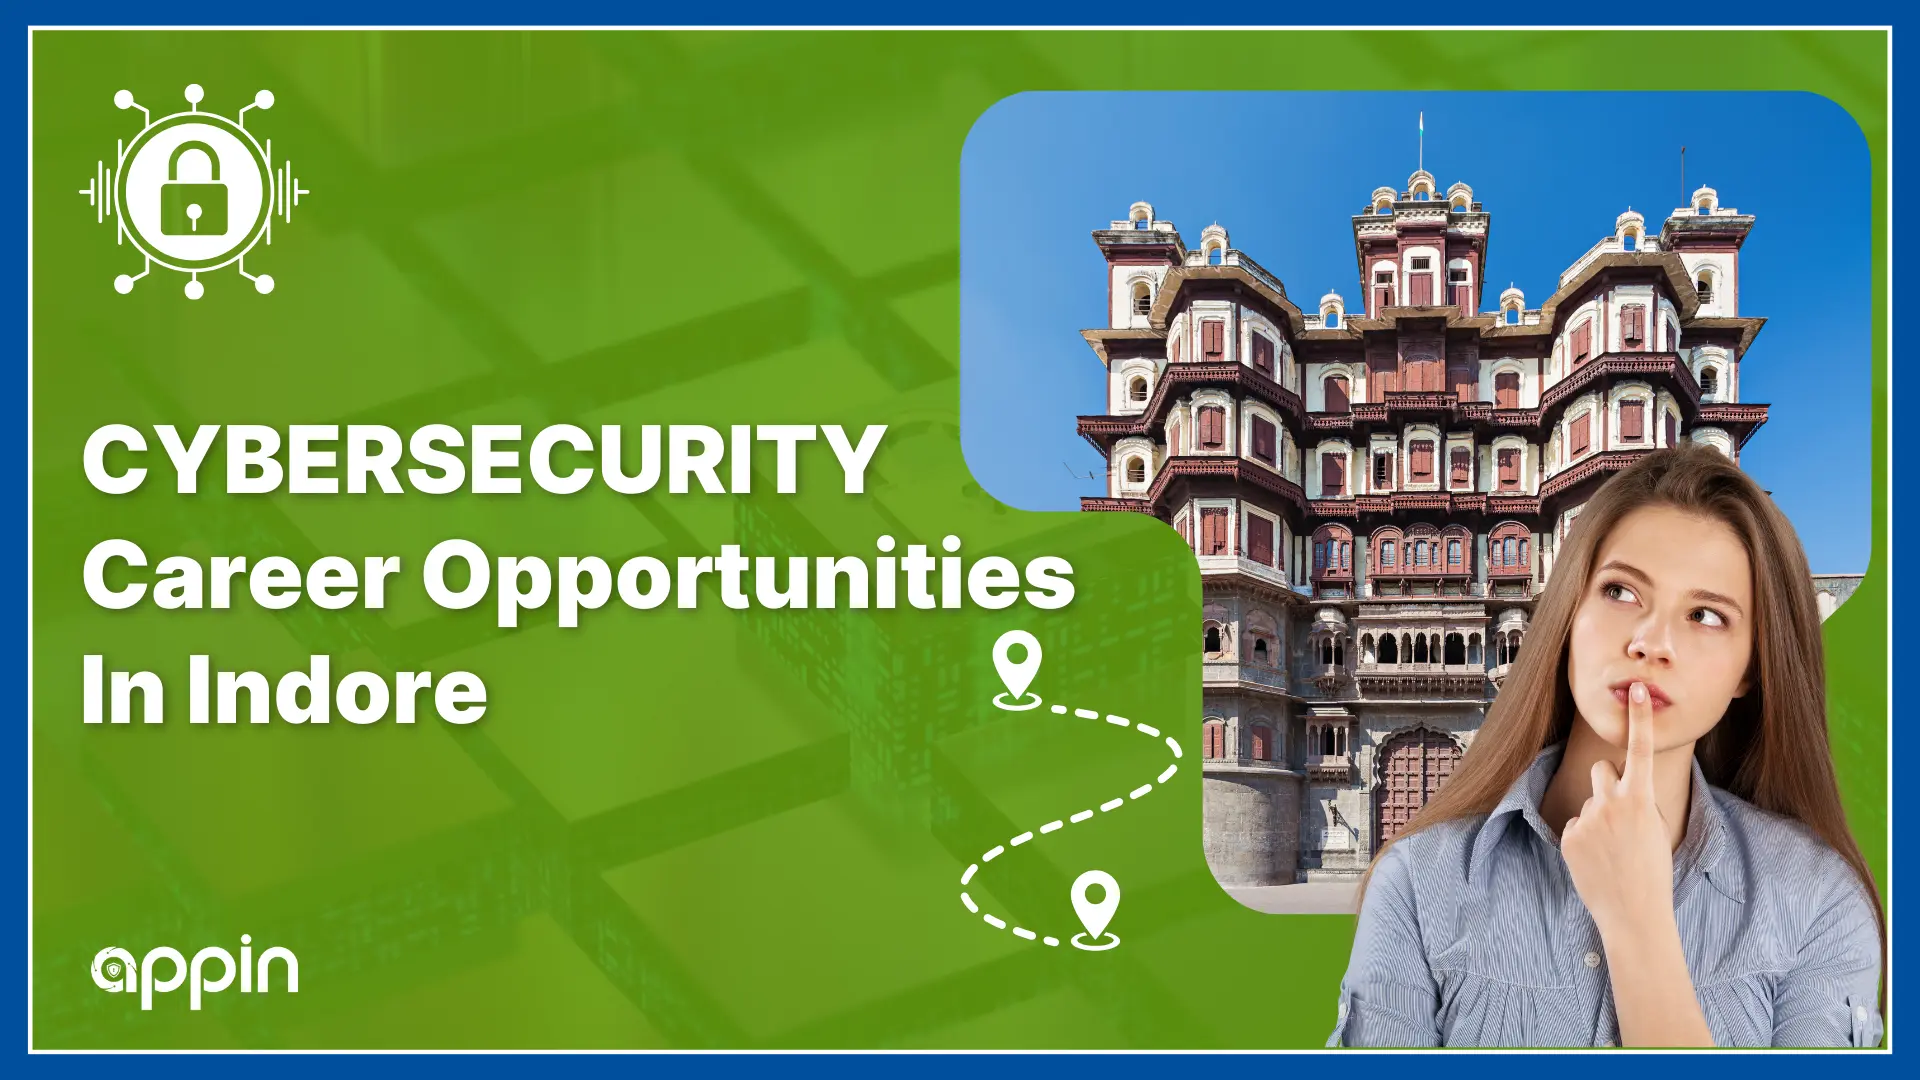 Career Opportunities in Cyber Security for Students in Indore